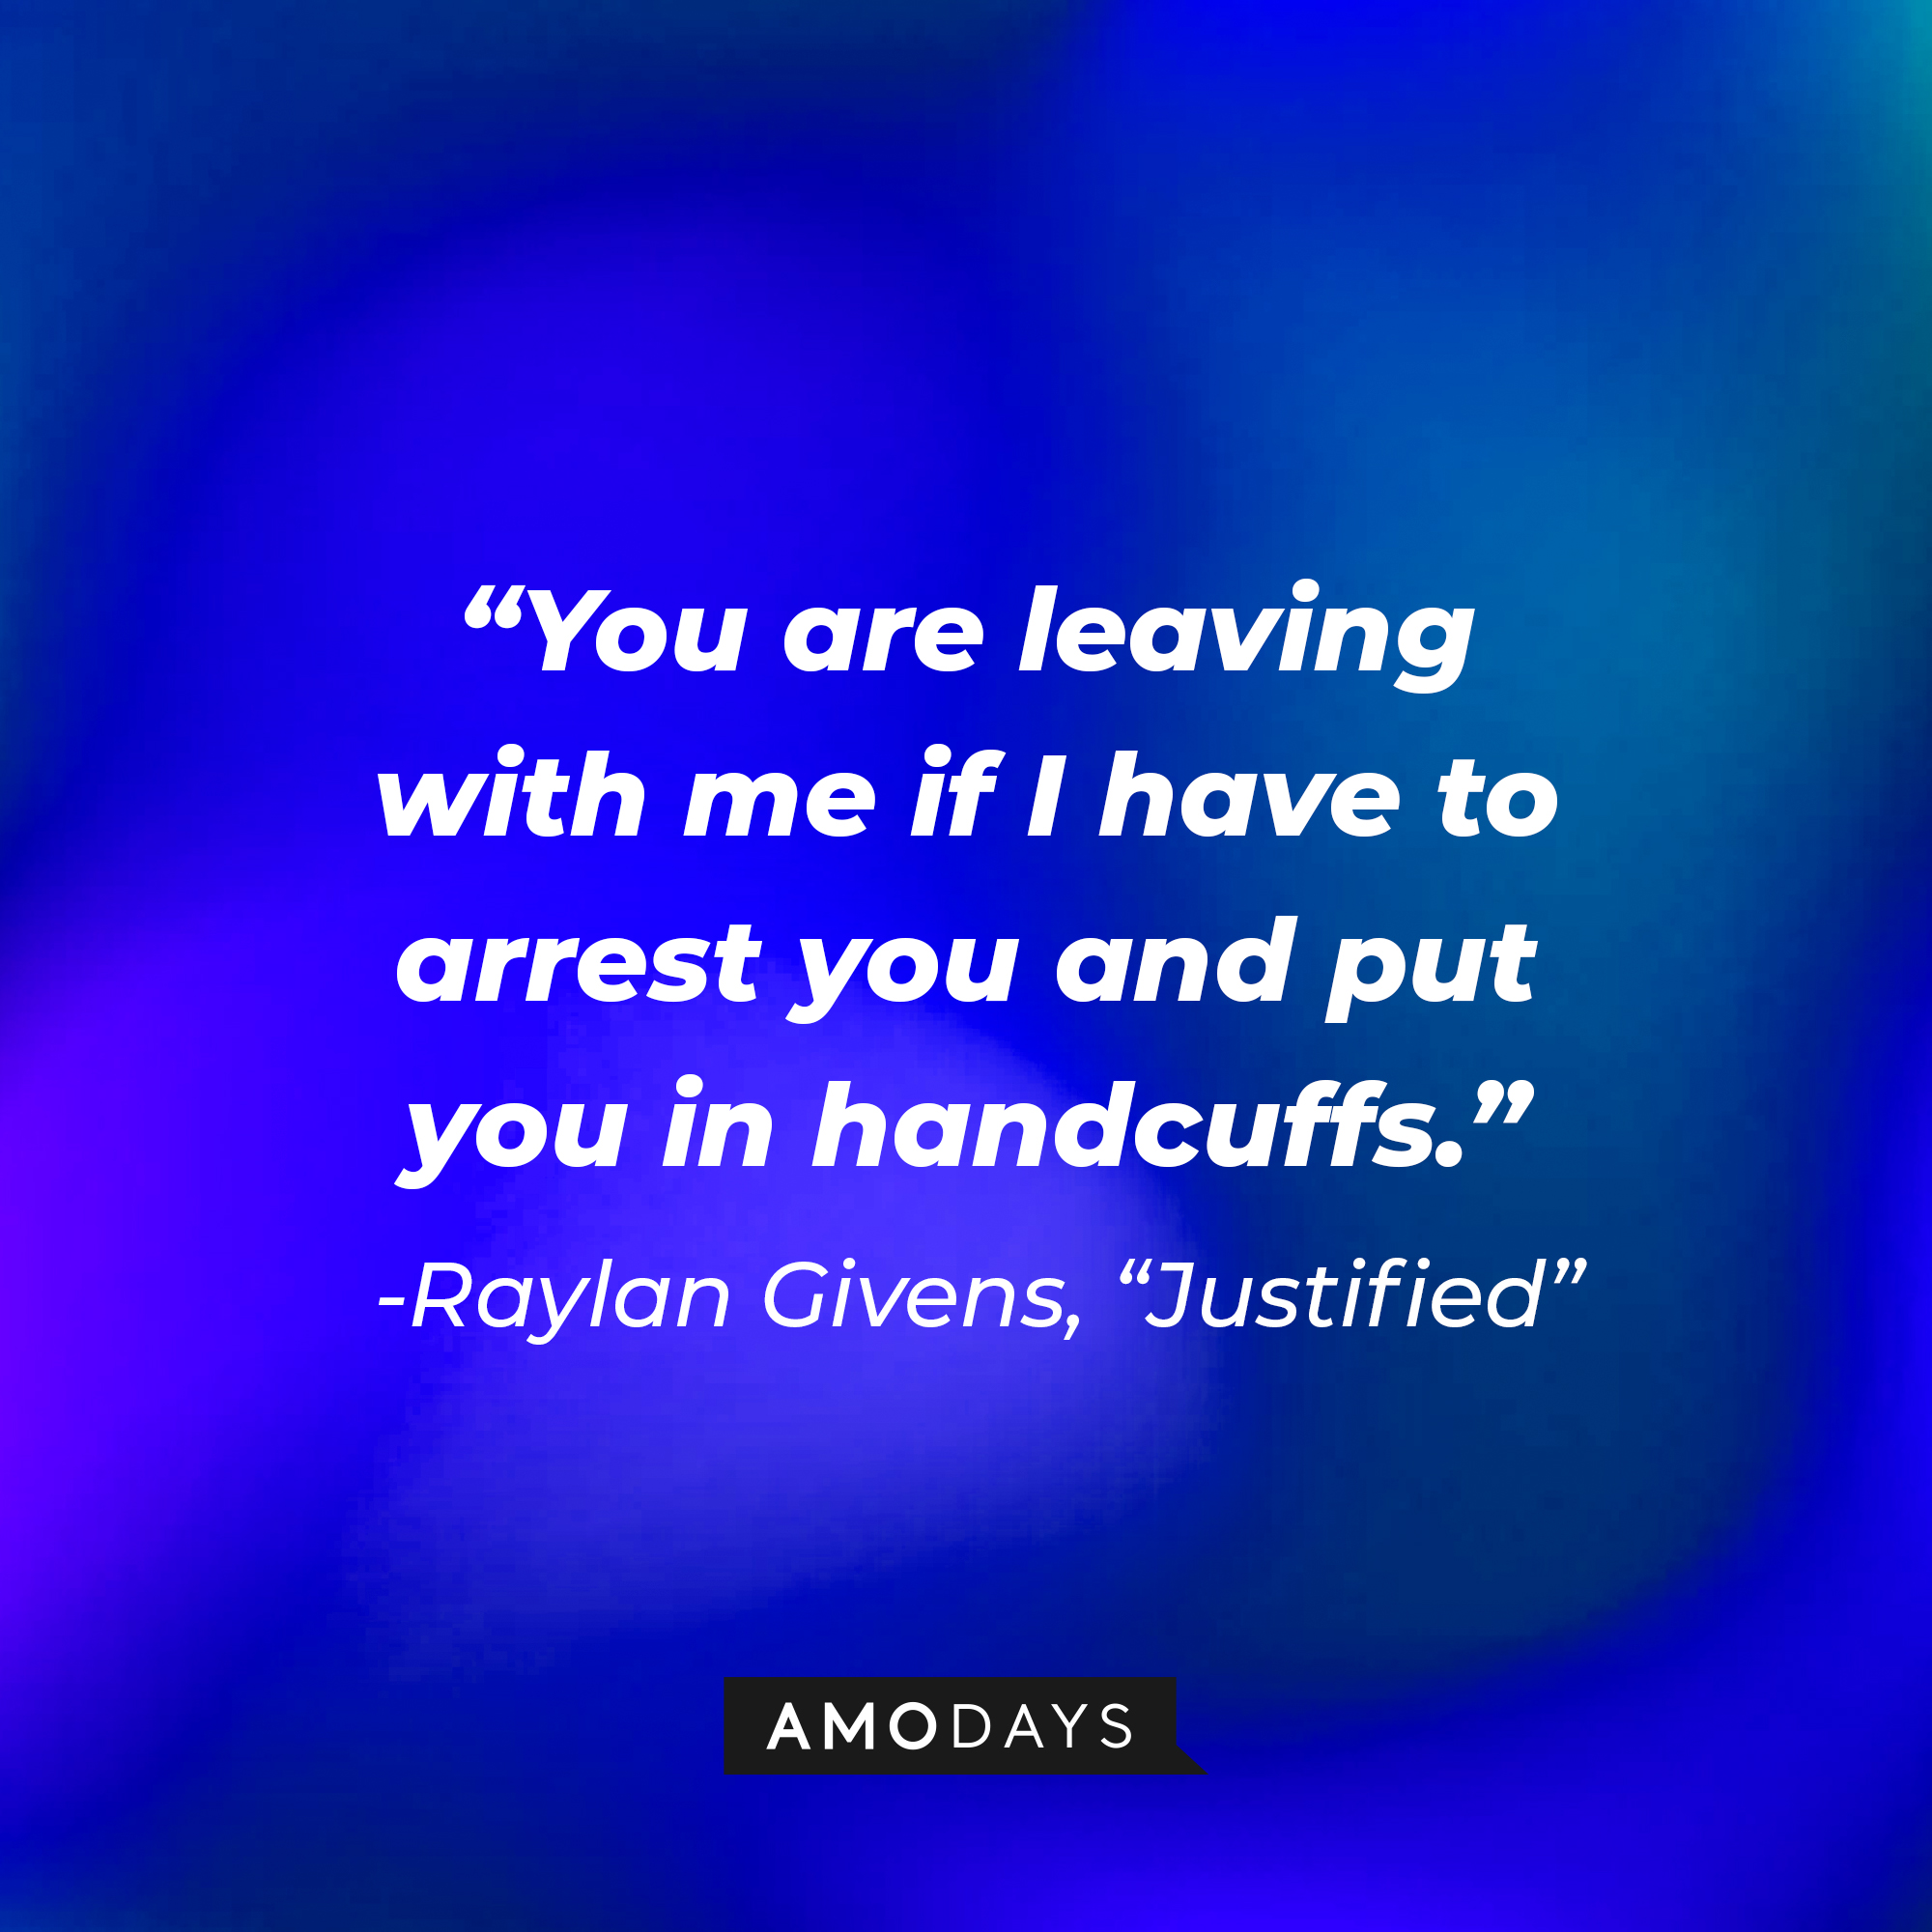 Raylan Givens’ quote from “Justified”: “You are leaving with me if I have to arrest you and put you in handcuffs.” | Source: AmoDays